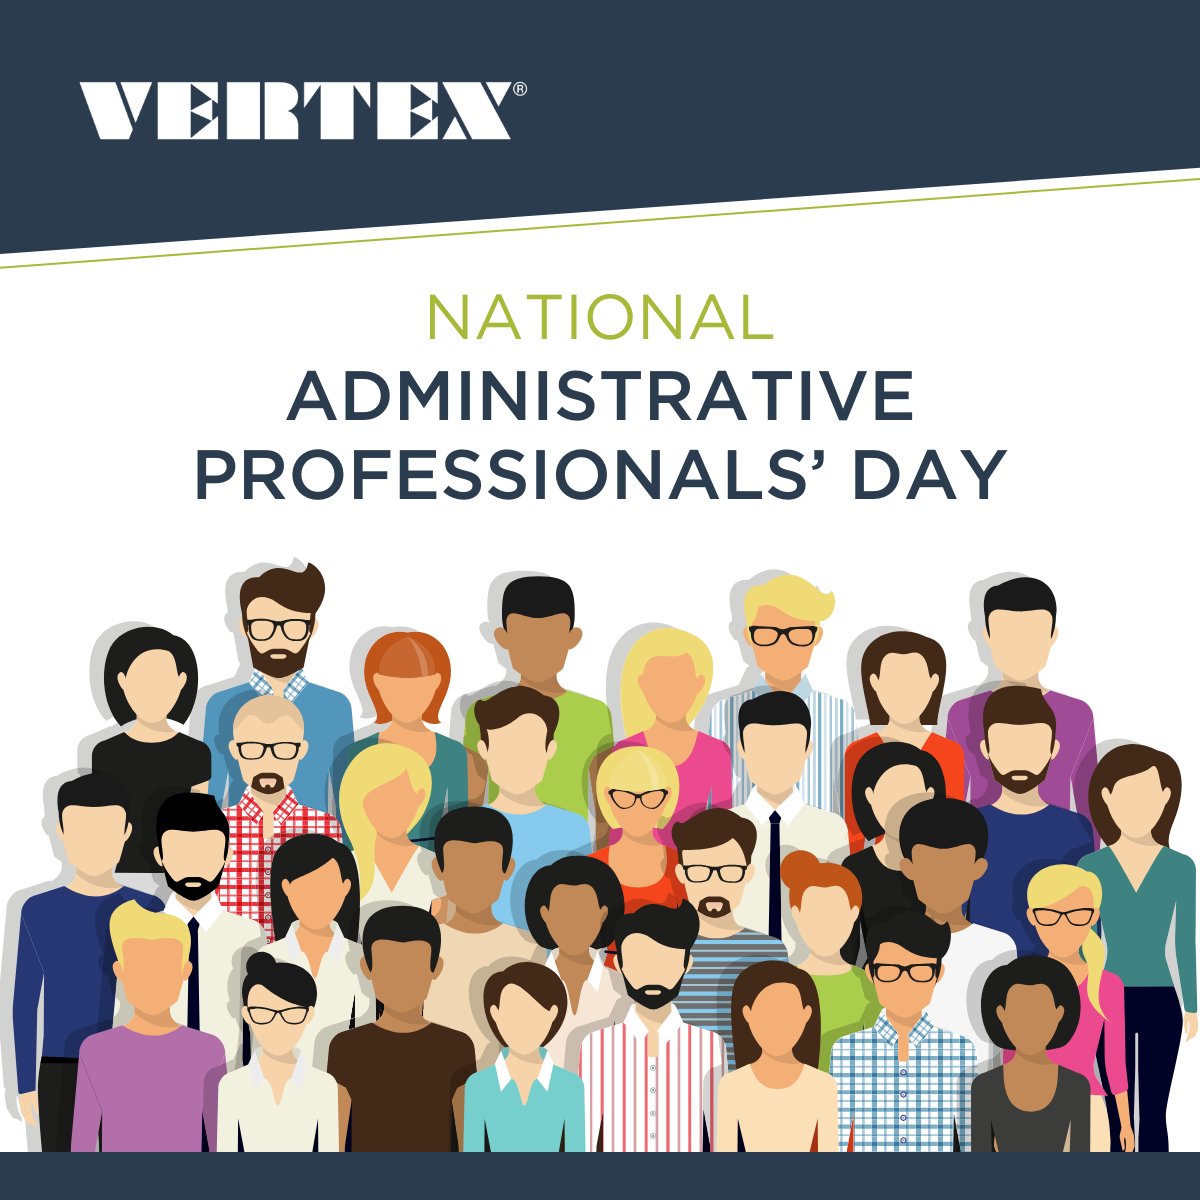 Happy National #AdministrationProfessionalsDay! To our amazing admin team at VERTEX: Thank you for keeping our operations running smoothly day in and day out. Your dedication and attention to detail are truly appreciated. Cheers to you! #TeamAppreciation #Thankyou #VertexEng